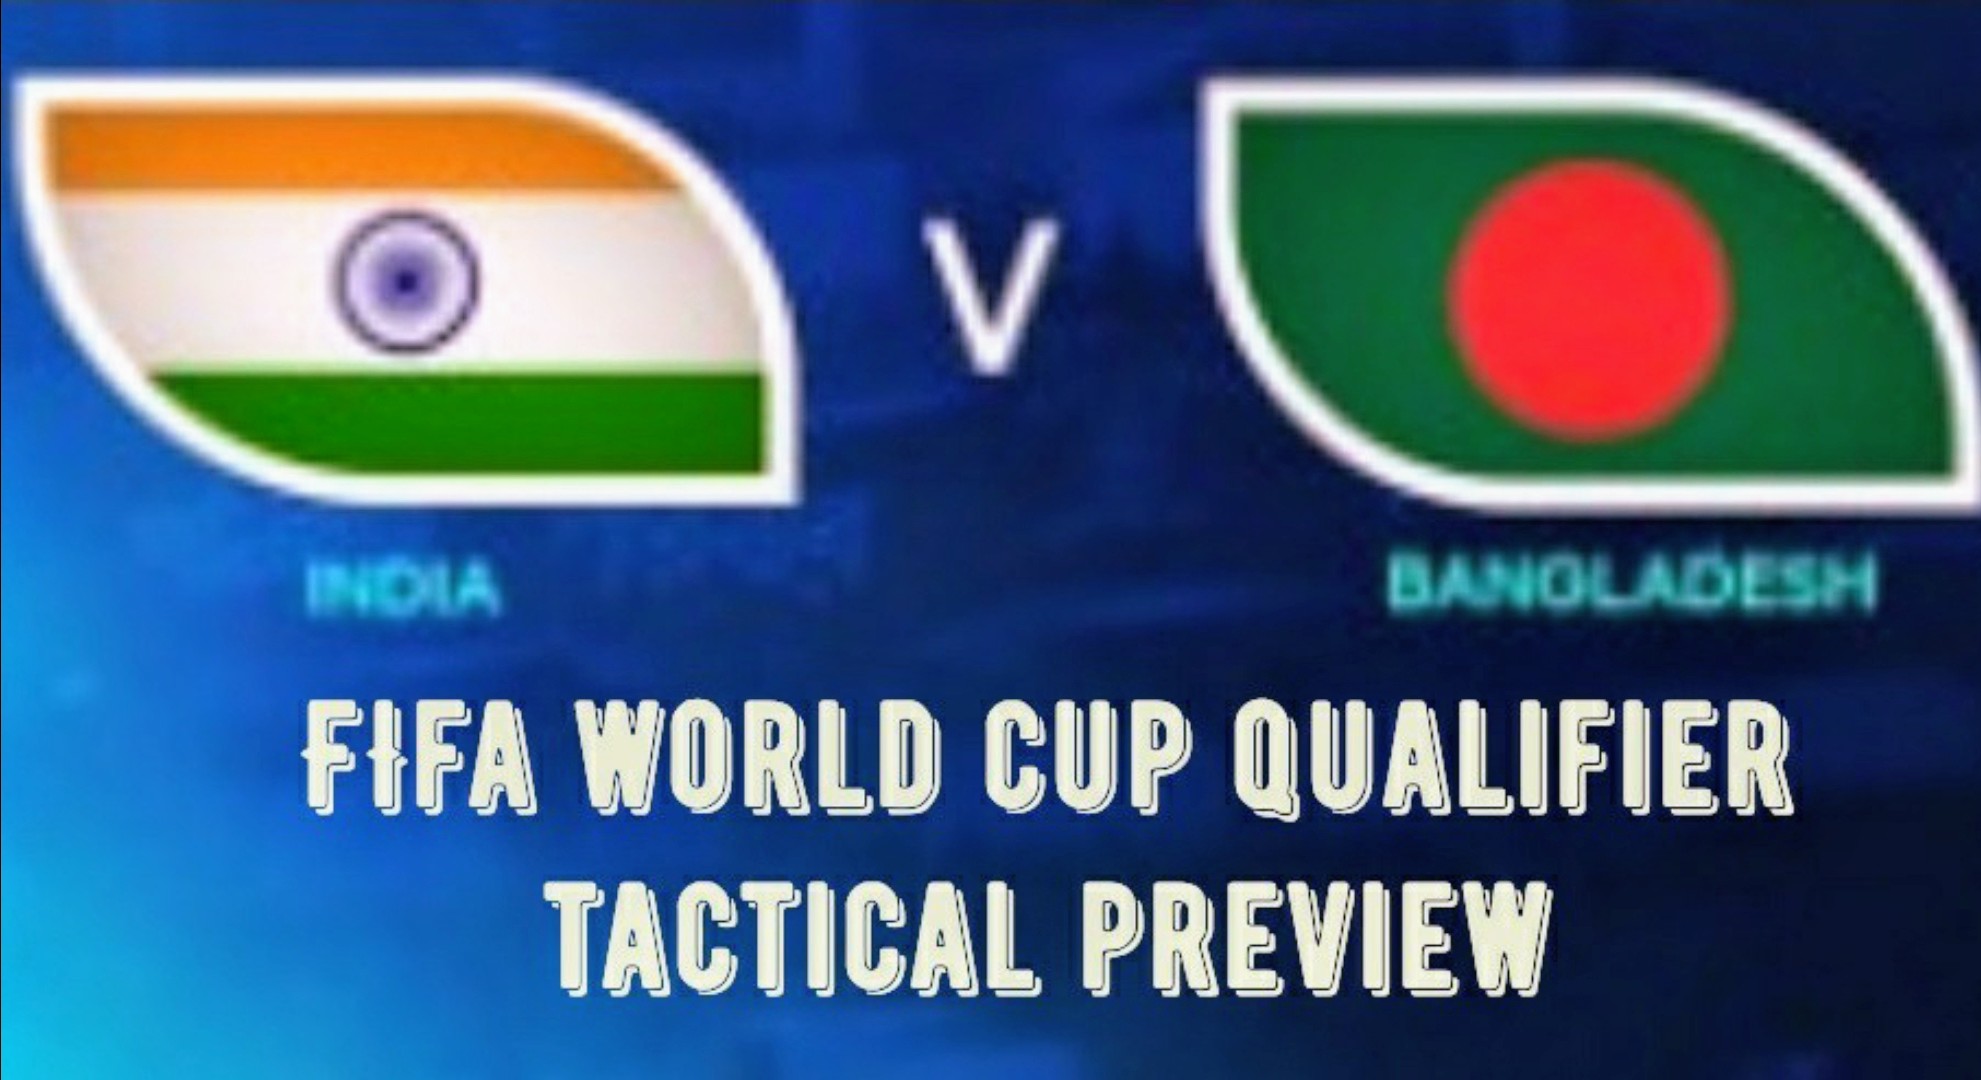 Bangladesh vs India FIFA World Cup Qualifier Tactical Preview with Renedy Singh and Richard Hood (420 Grams) NewsClick